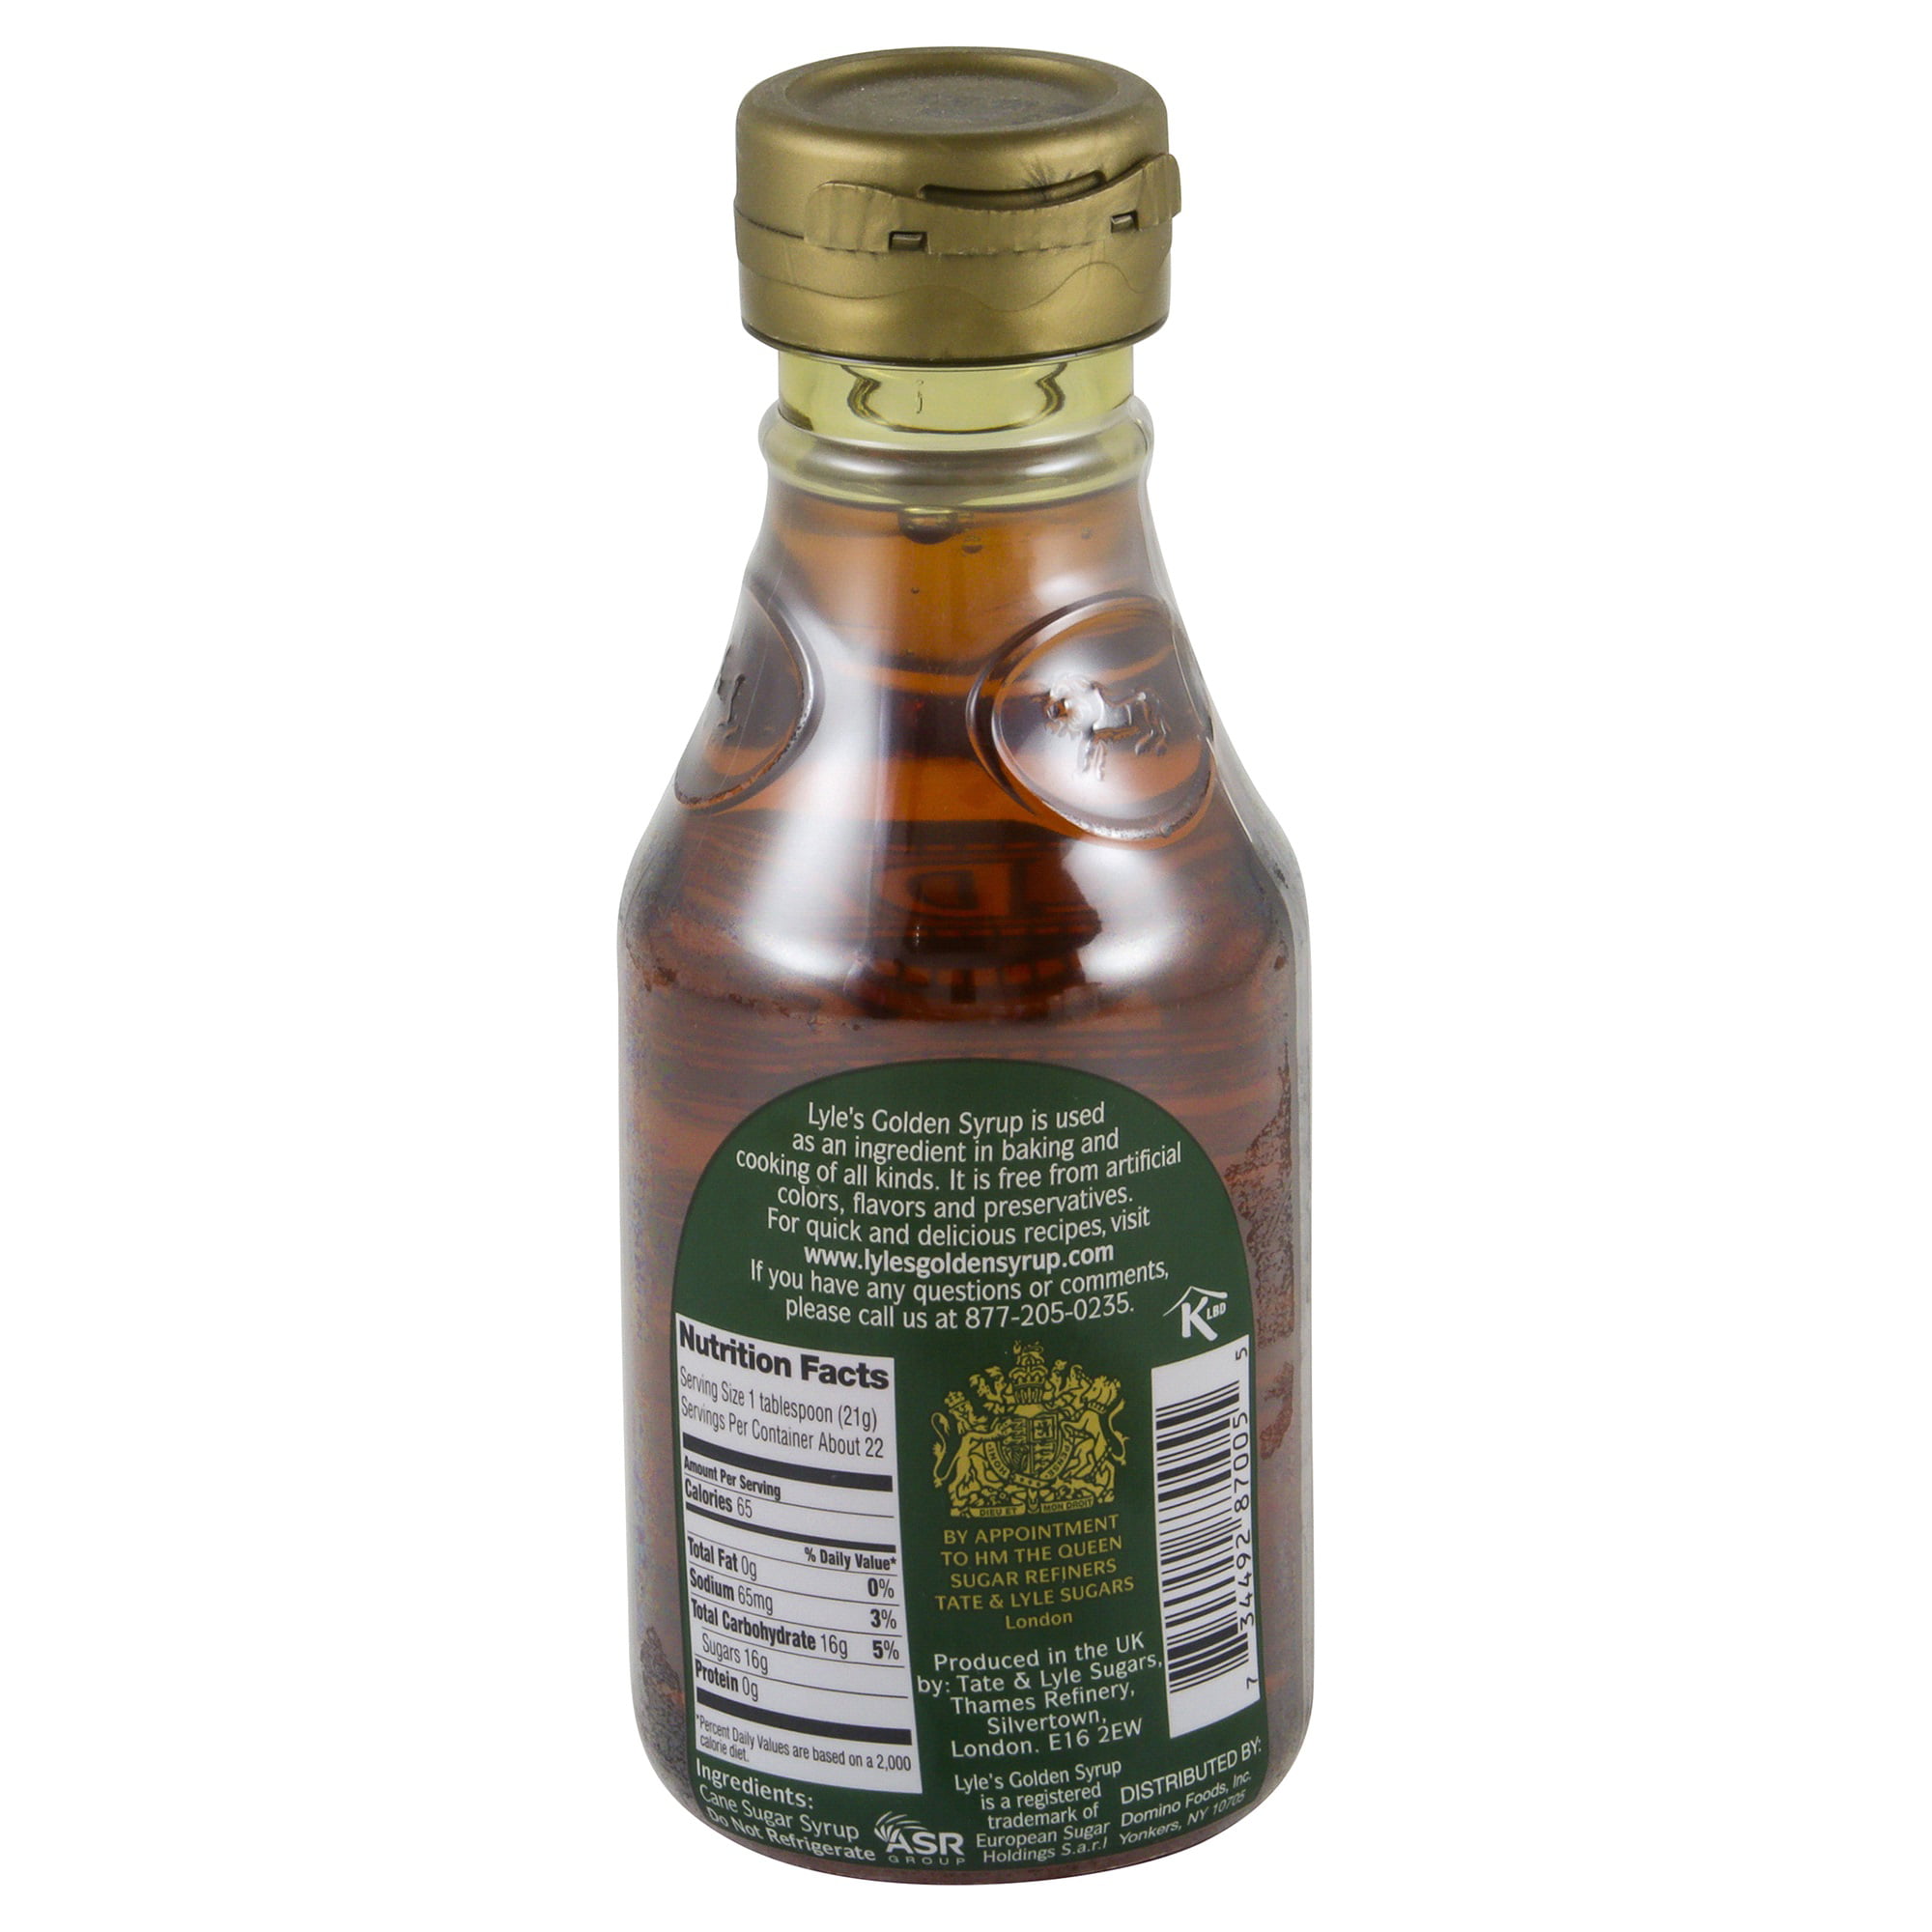 Lyle's Golden Syrup Cane Sugar Syrup - Case of 12/16 oz